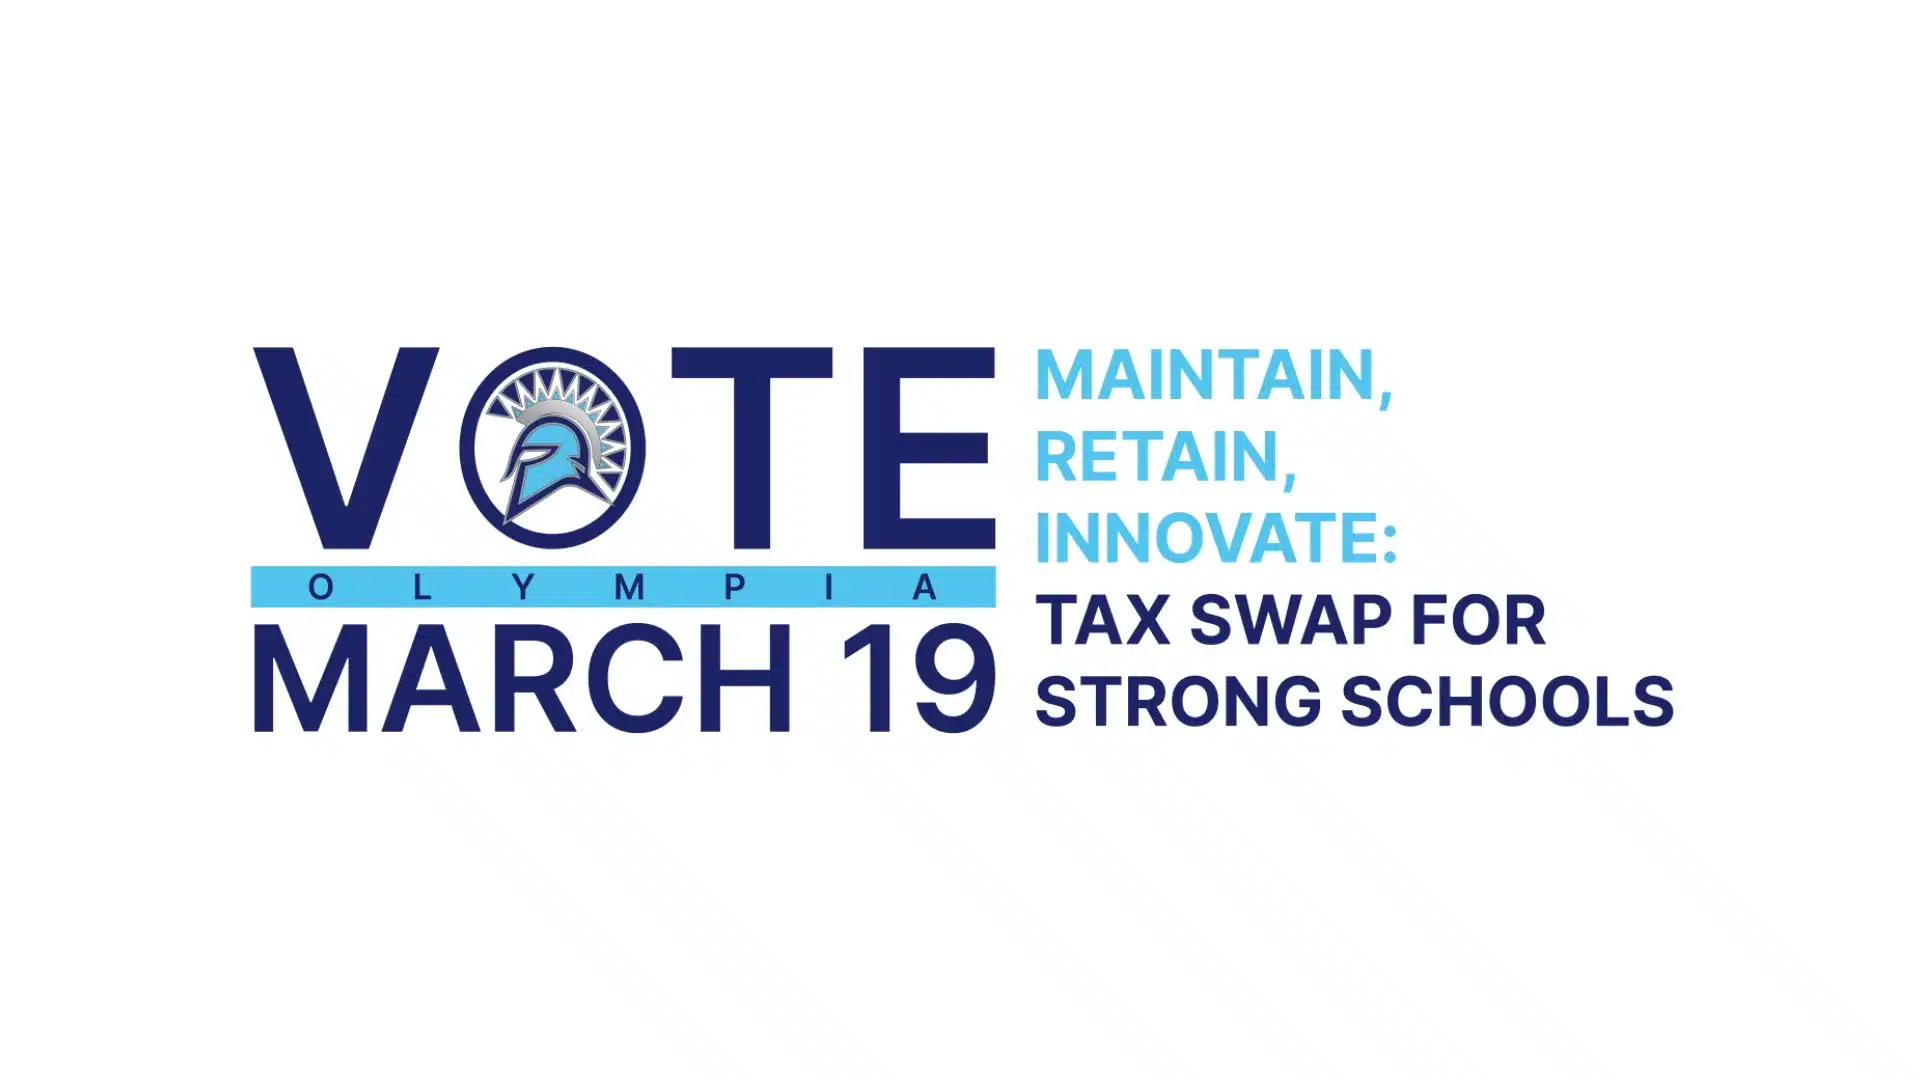 Referendum logo image: "Vote Olympia March 19. Maintain, retain, innovate: tax swap for strong schools"